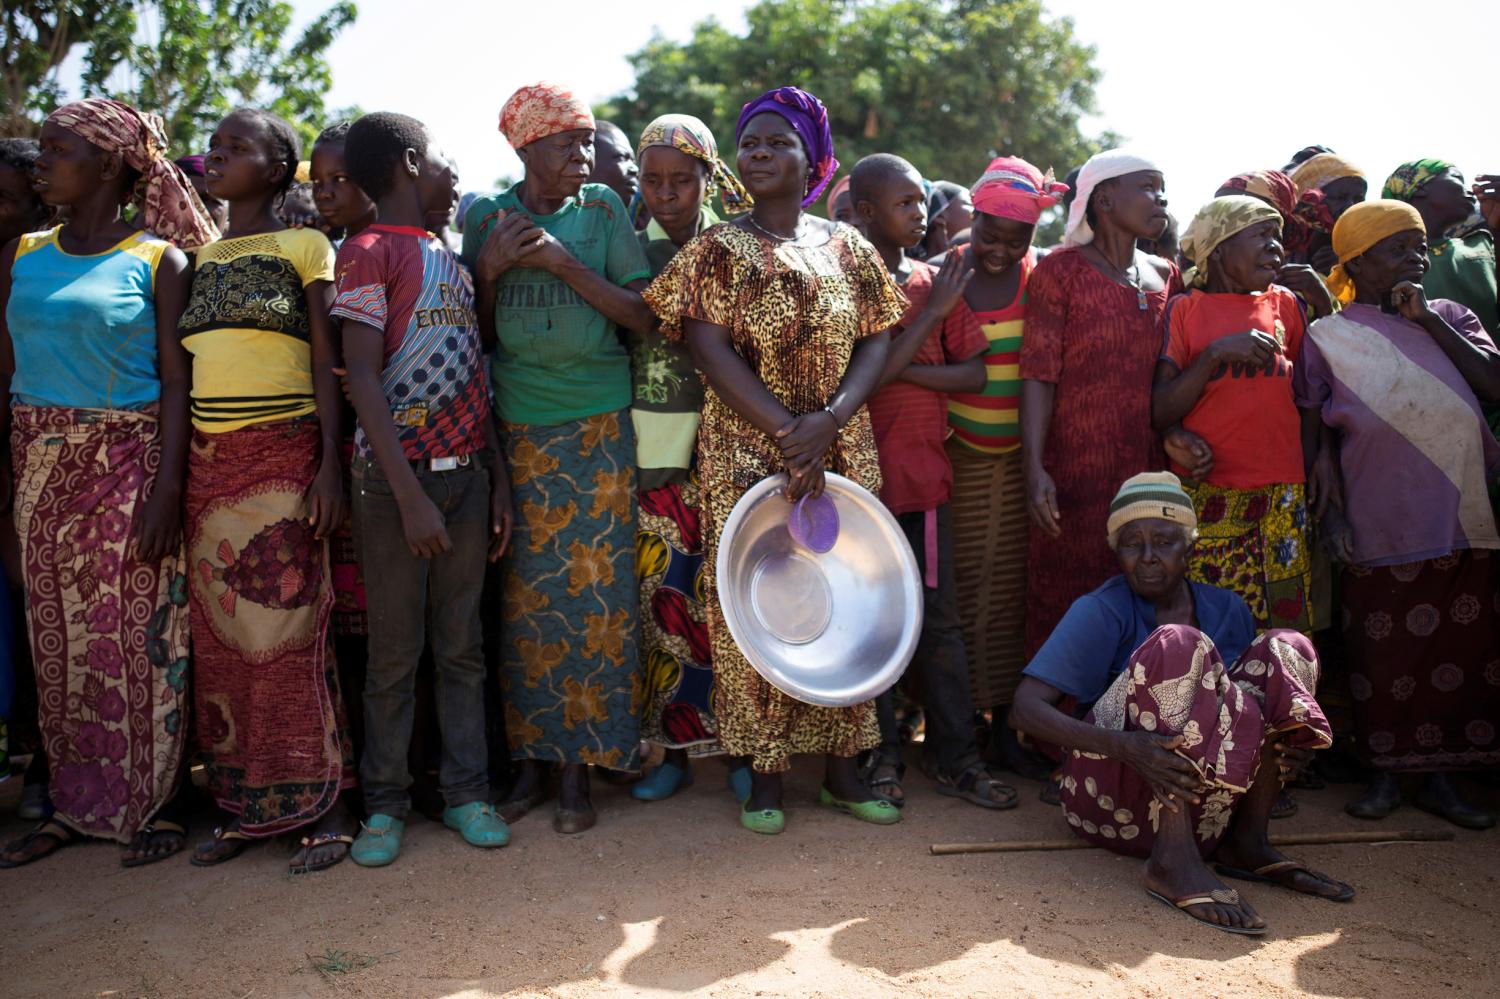 Women stand in line for food aid distribution delivered by the United Nations Office for the Coordination of Humanitarian Affairs and world food program in the village of Makunzi Wali, Central African Republic, April 27, 2017. Picture taken April 27, 2017 REUTERS/Baz Ratner - RC132928B970